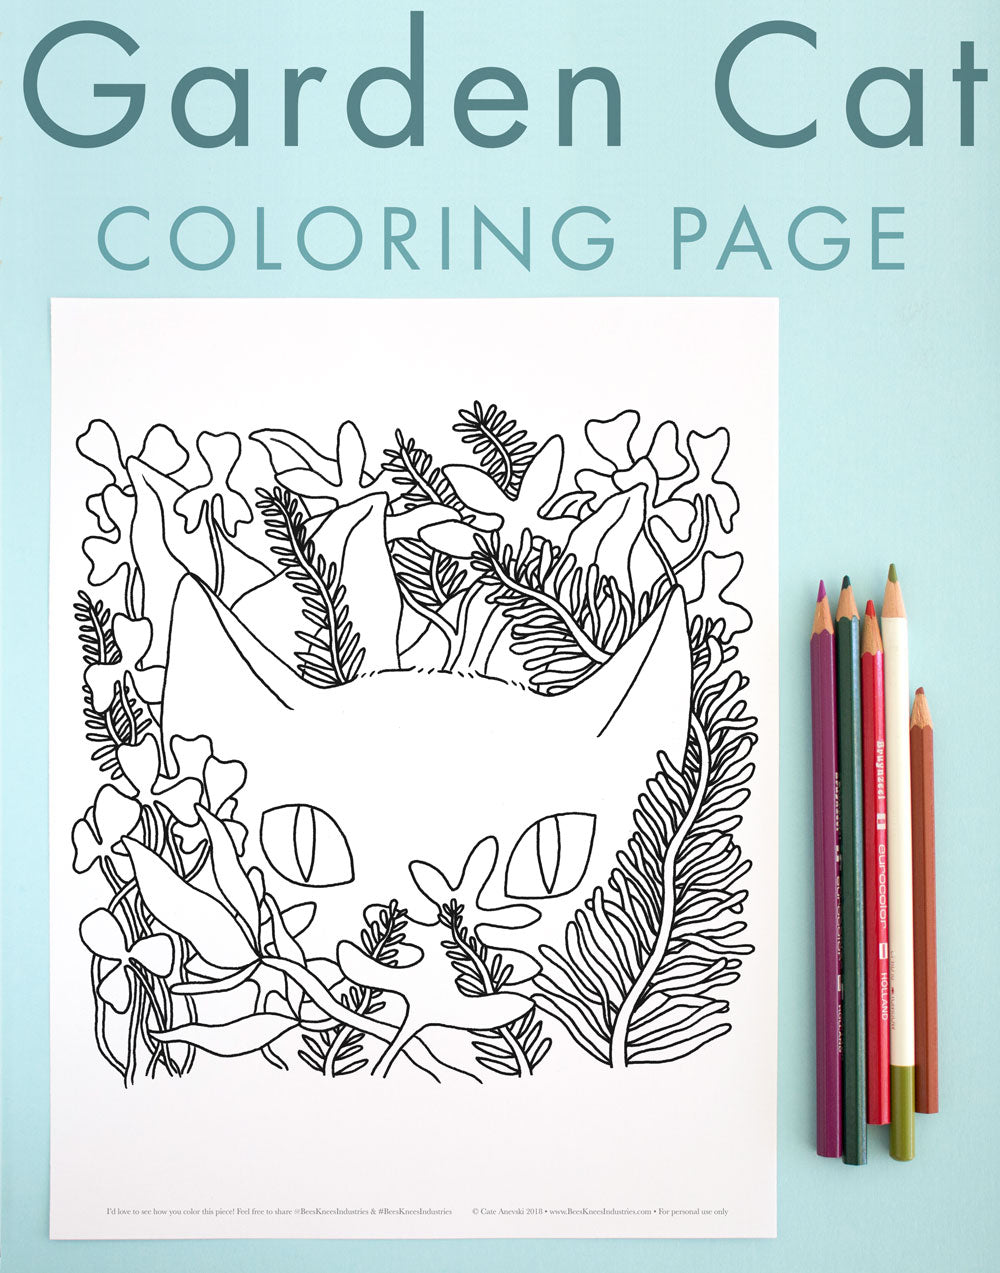 Cat in the Garden Coloring Page